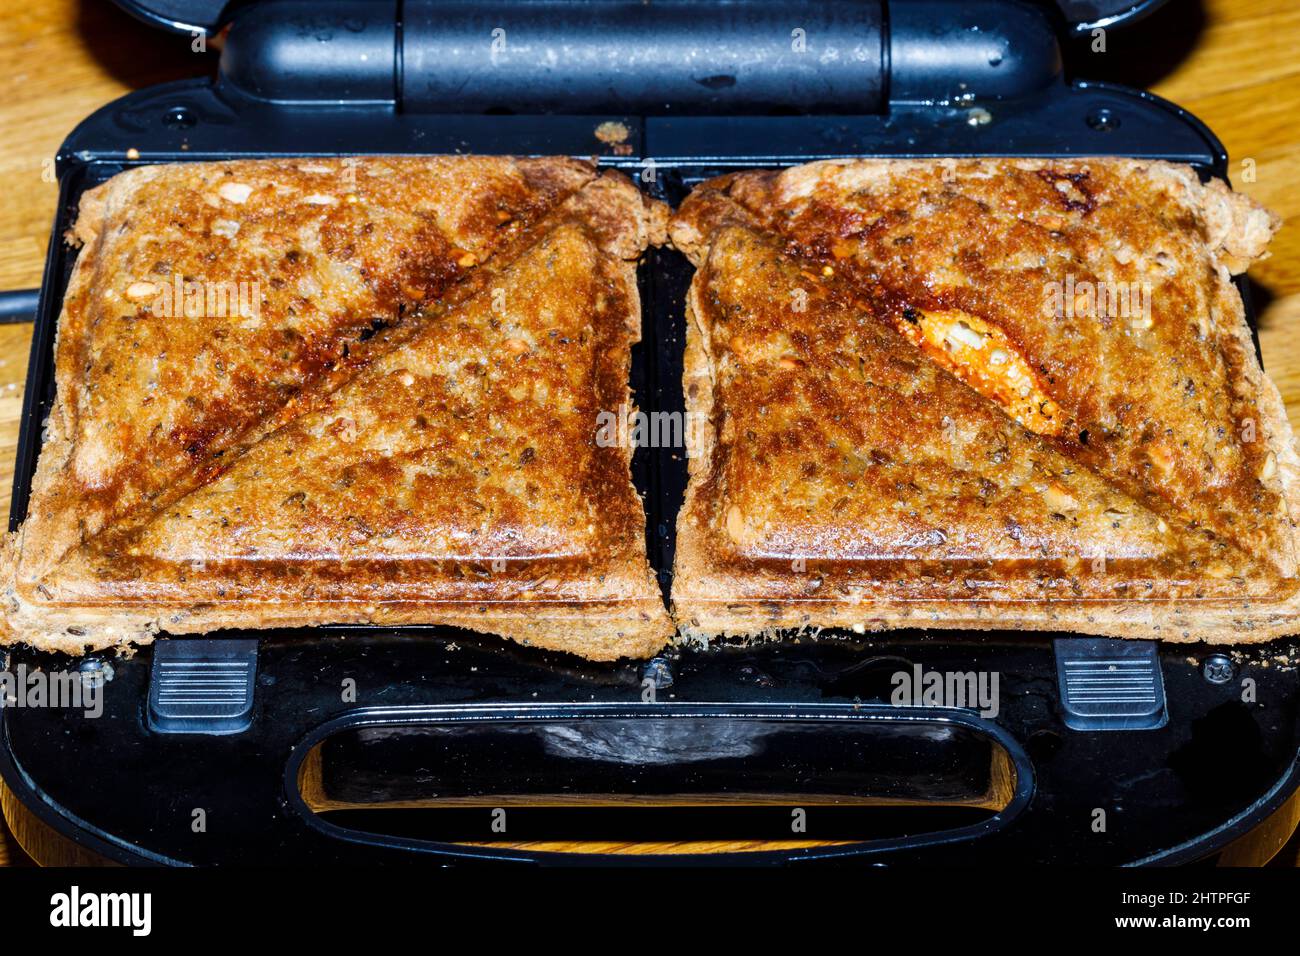 https://c8.alamy.com/comp/2HTPFGF/toasted-sandwich-machine-or-toastie-maker-a-popular-lunchtime-snack-2HTPFGF.jpg